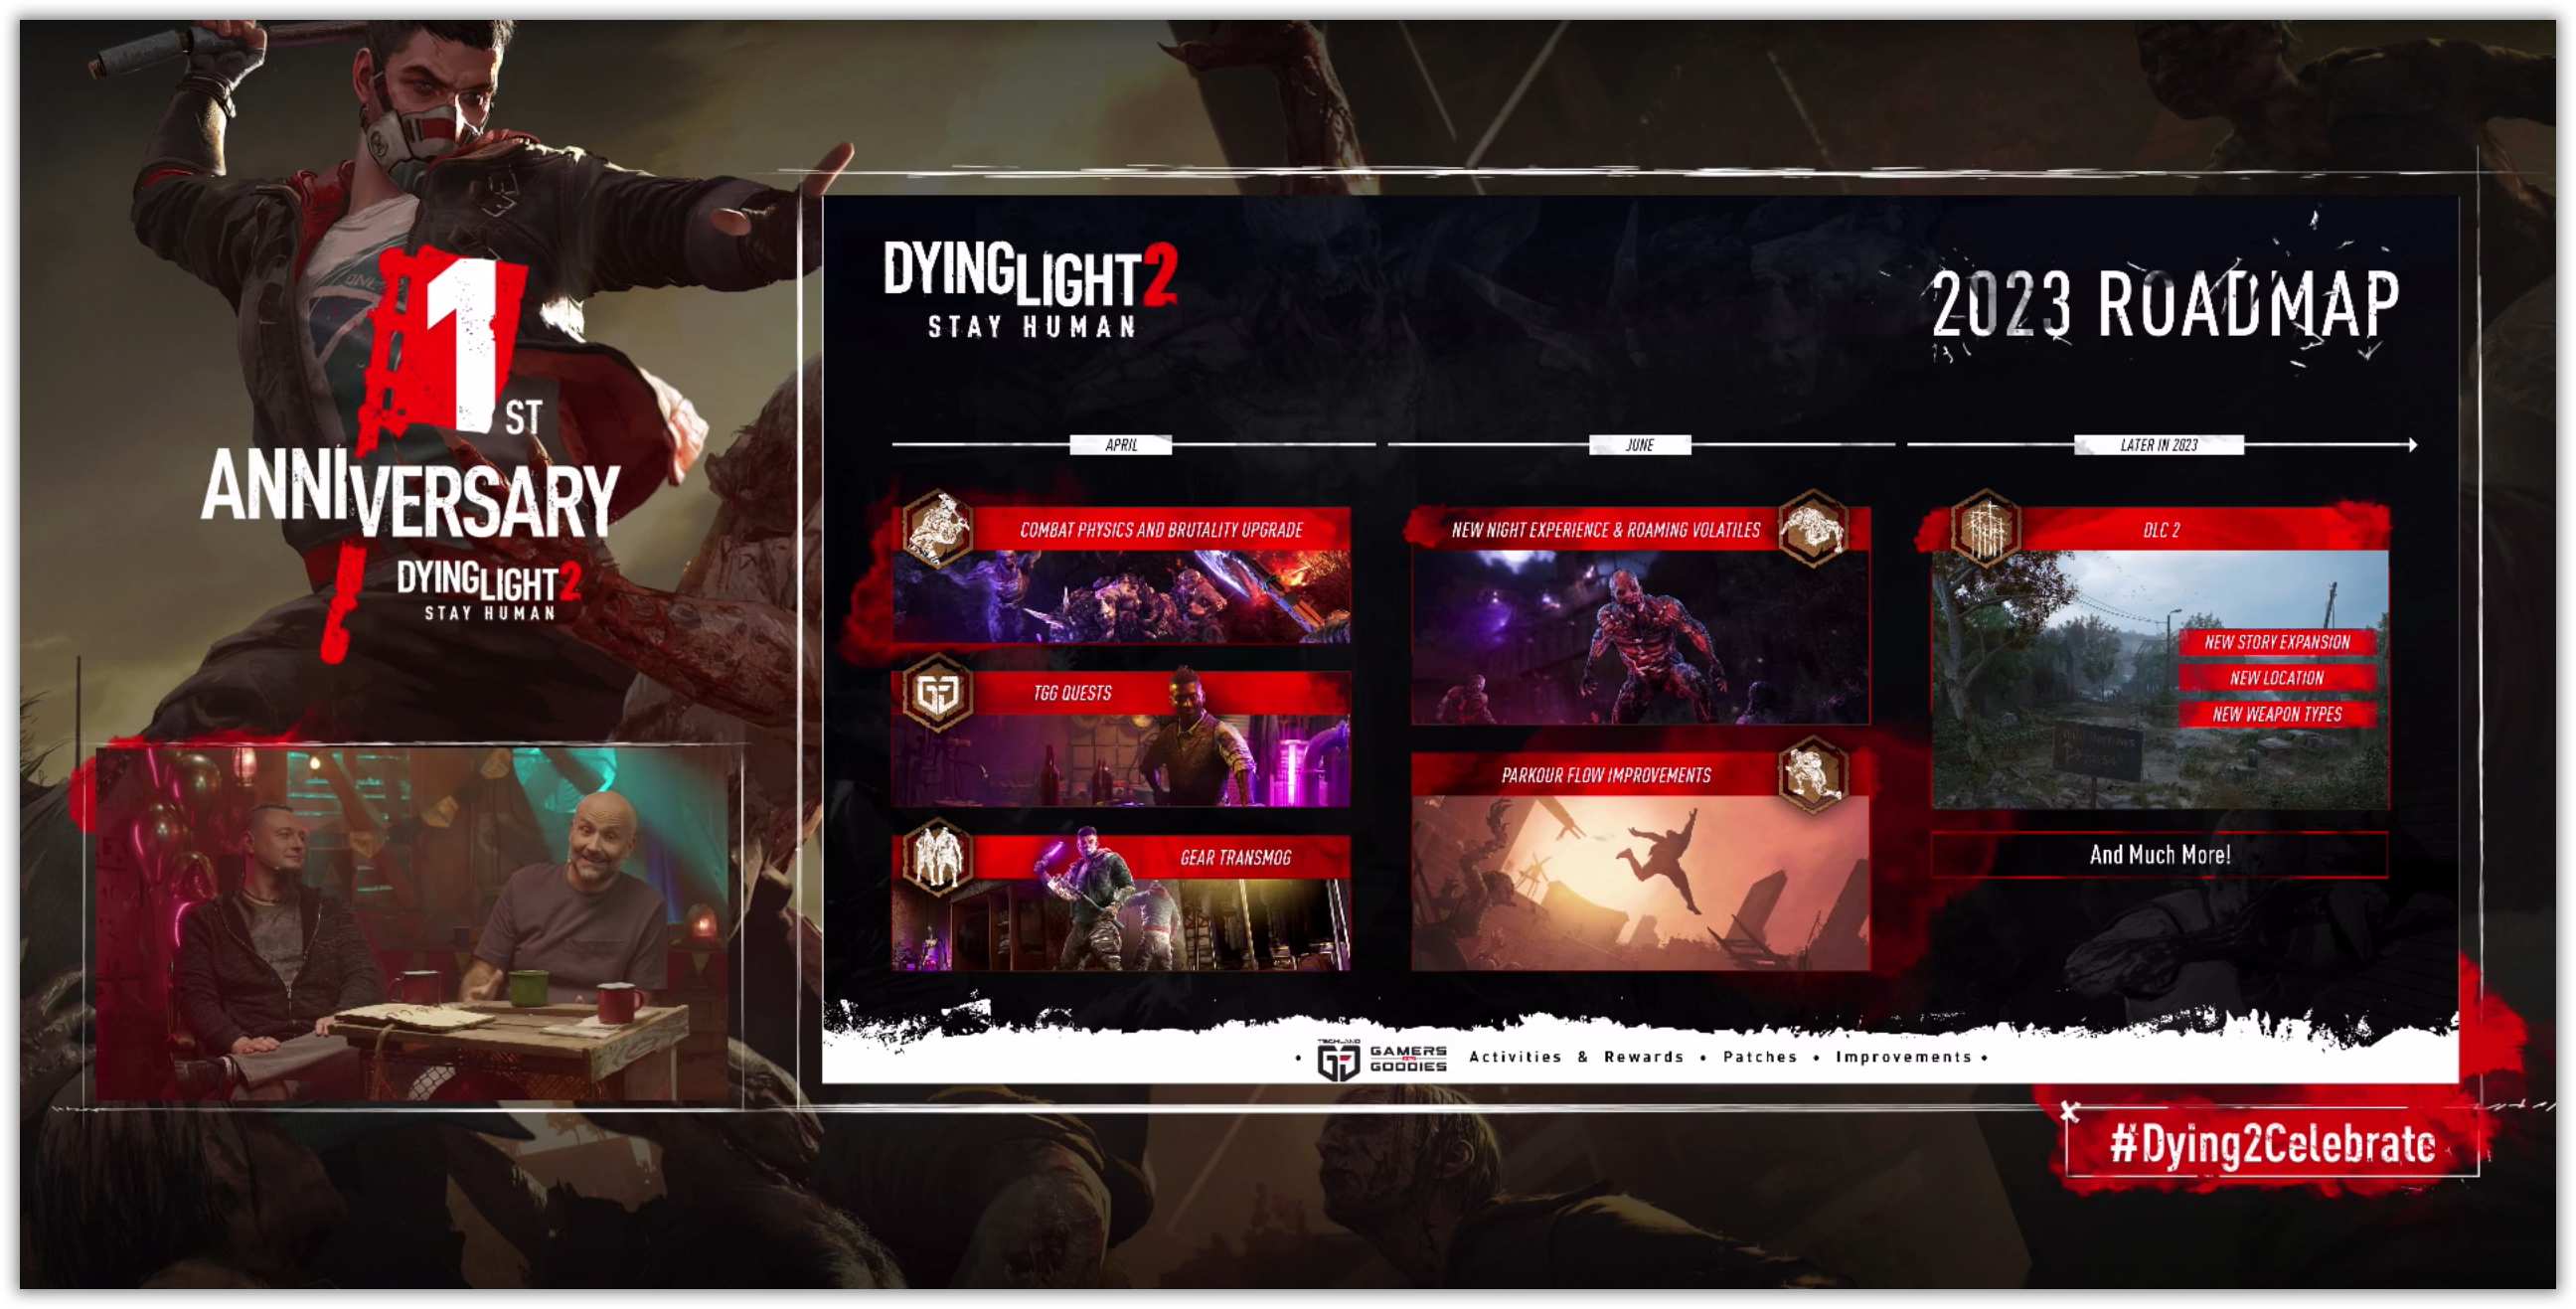 Steam is required in order to play dying light перевод на русский фото 113